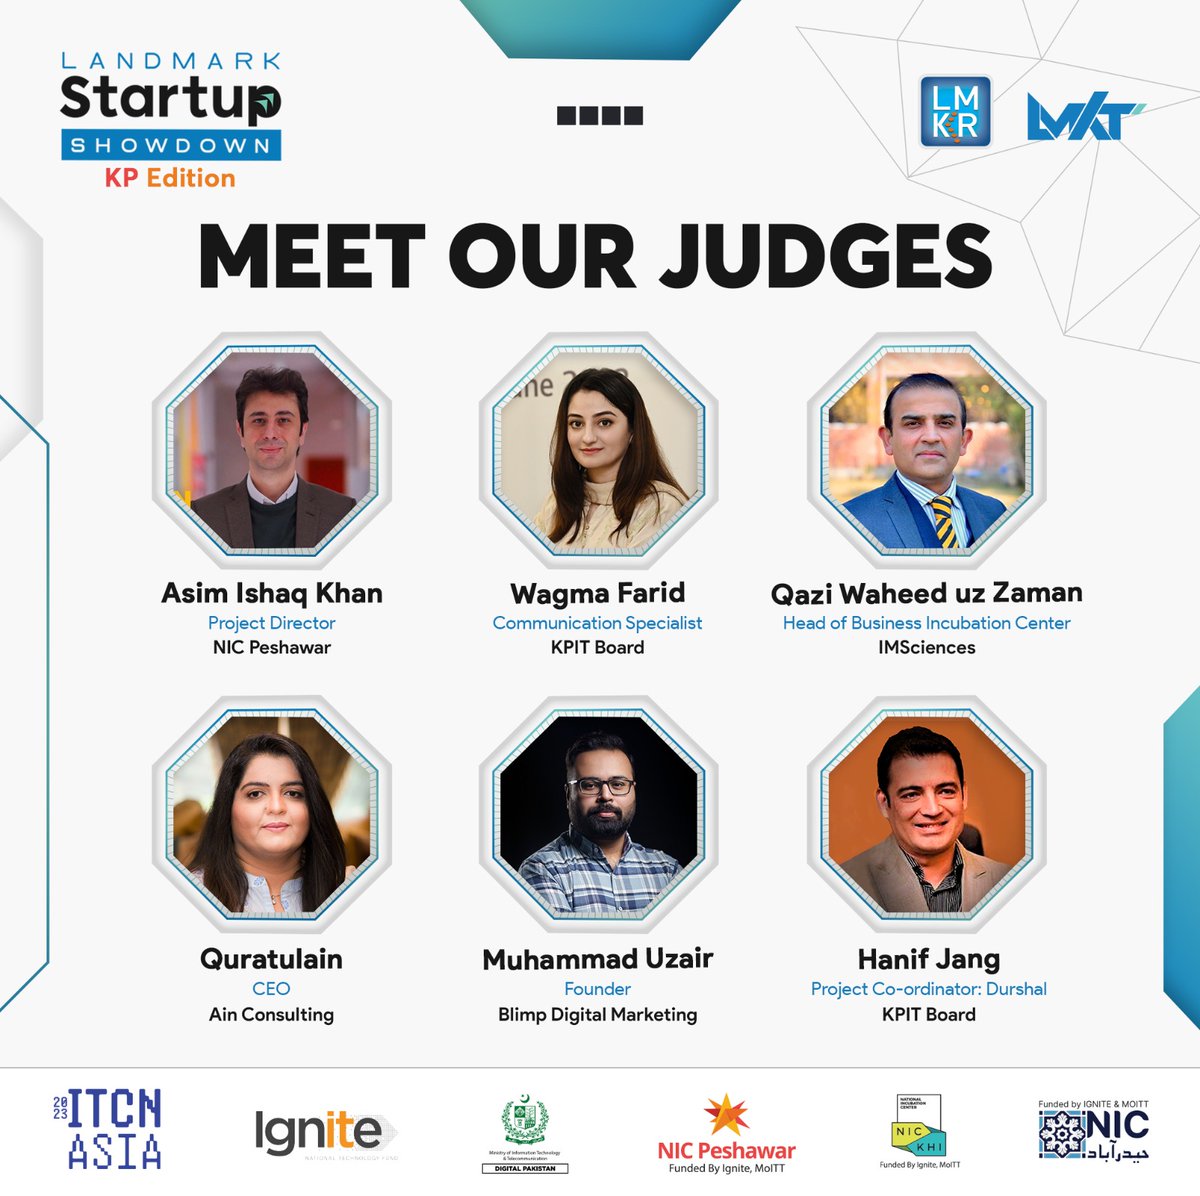 Introducing our esteemed panel of judges at the Landmark Startup Showdown KP Edition!

With their vast expertise and industry insights, they will provide invaluable guidance to our participating startups.

#NICPeshawar #Landmarkstartupshowdown #ITCNAsia #LMKT